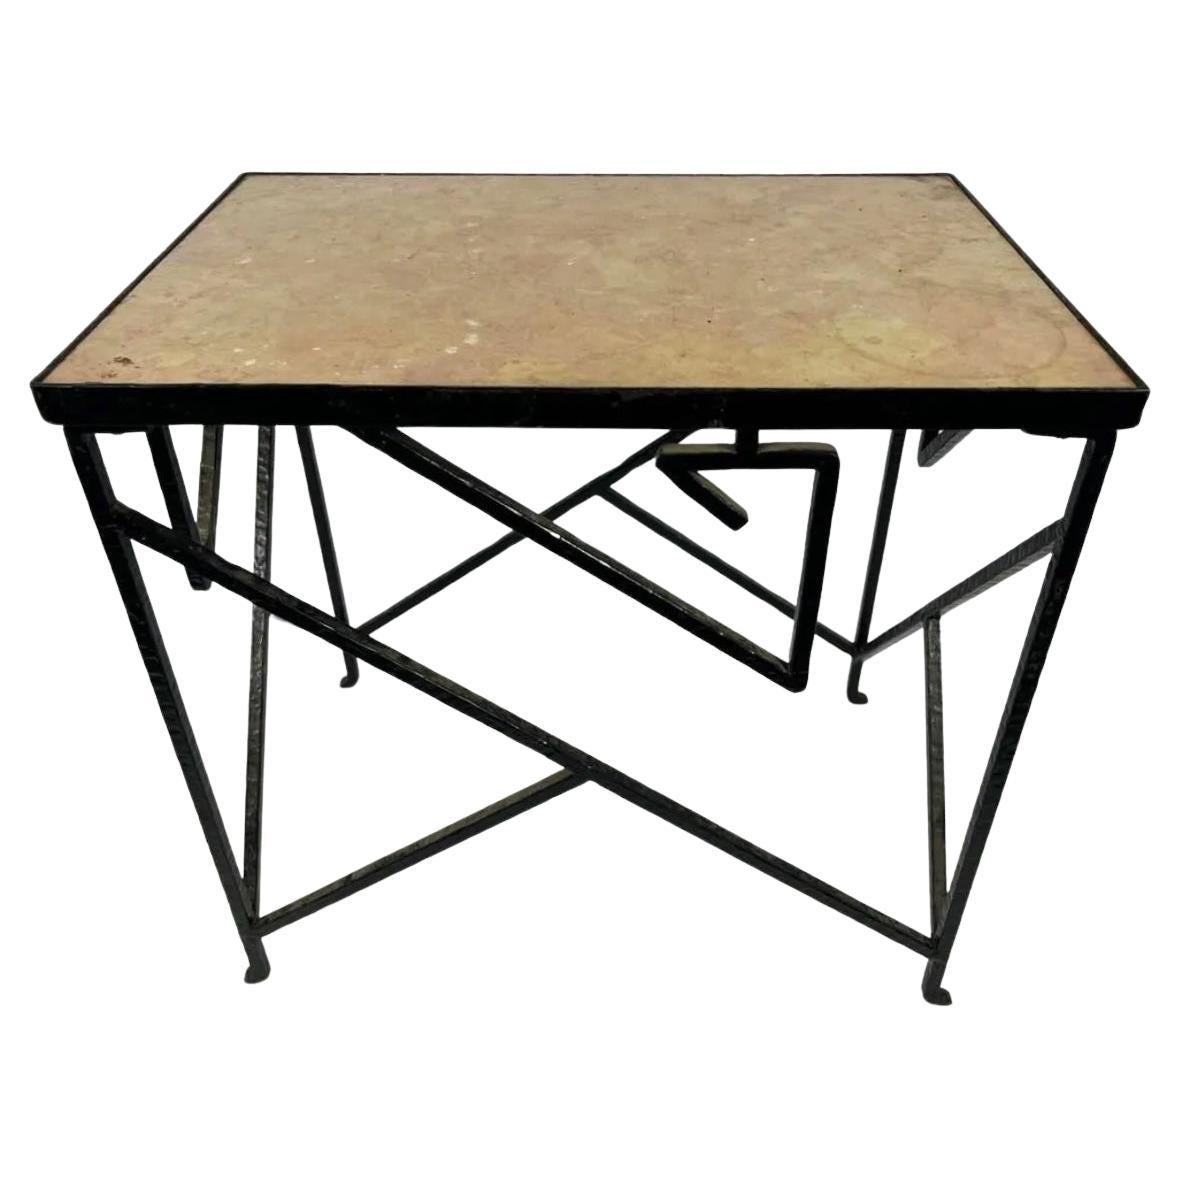 Cubist End Table with Hand-Wrought Black Iron Base and Stone Top, circa 1930 For Sale